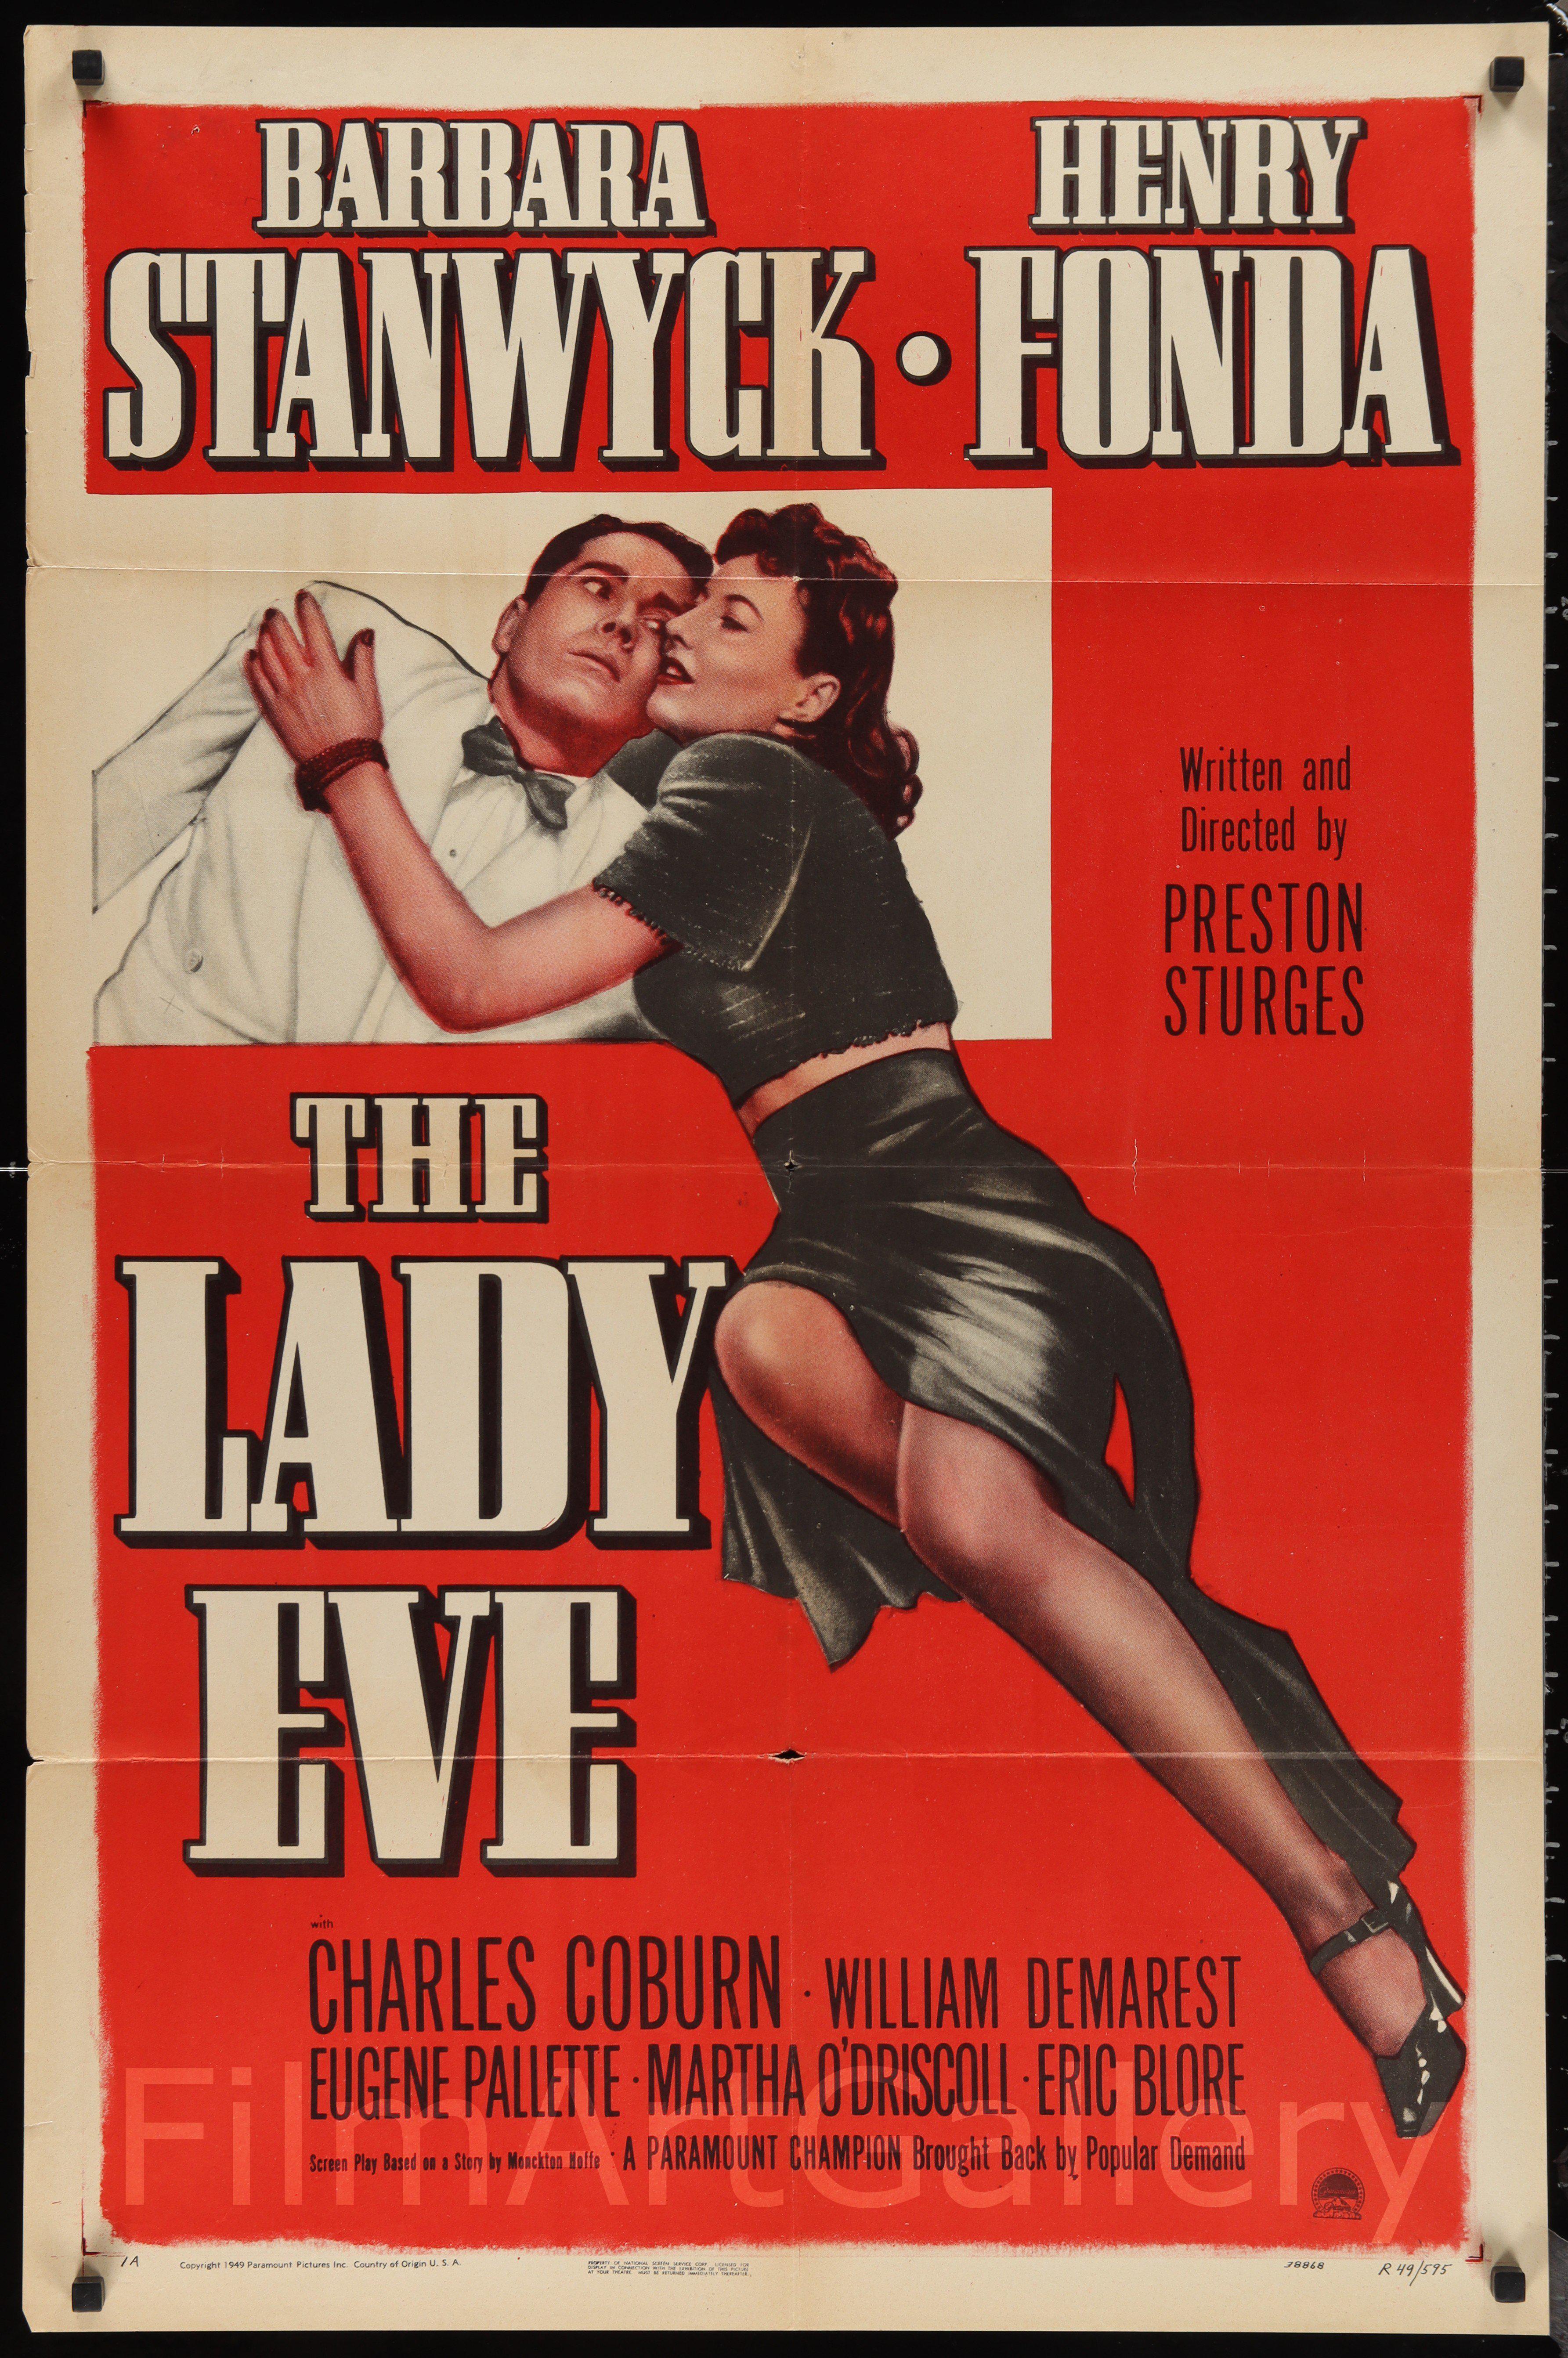 Barbara Stanwyck - Lady Of Burlesque - Movie Still Poster